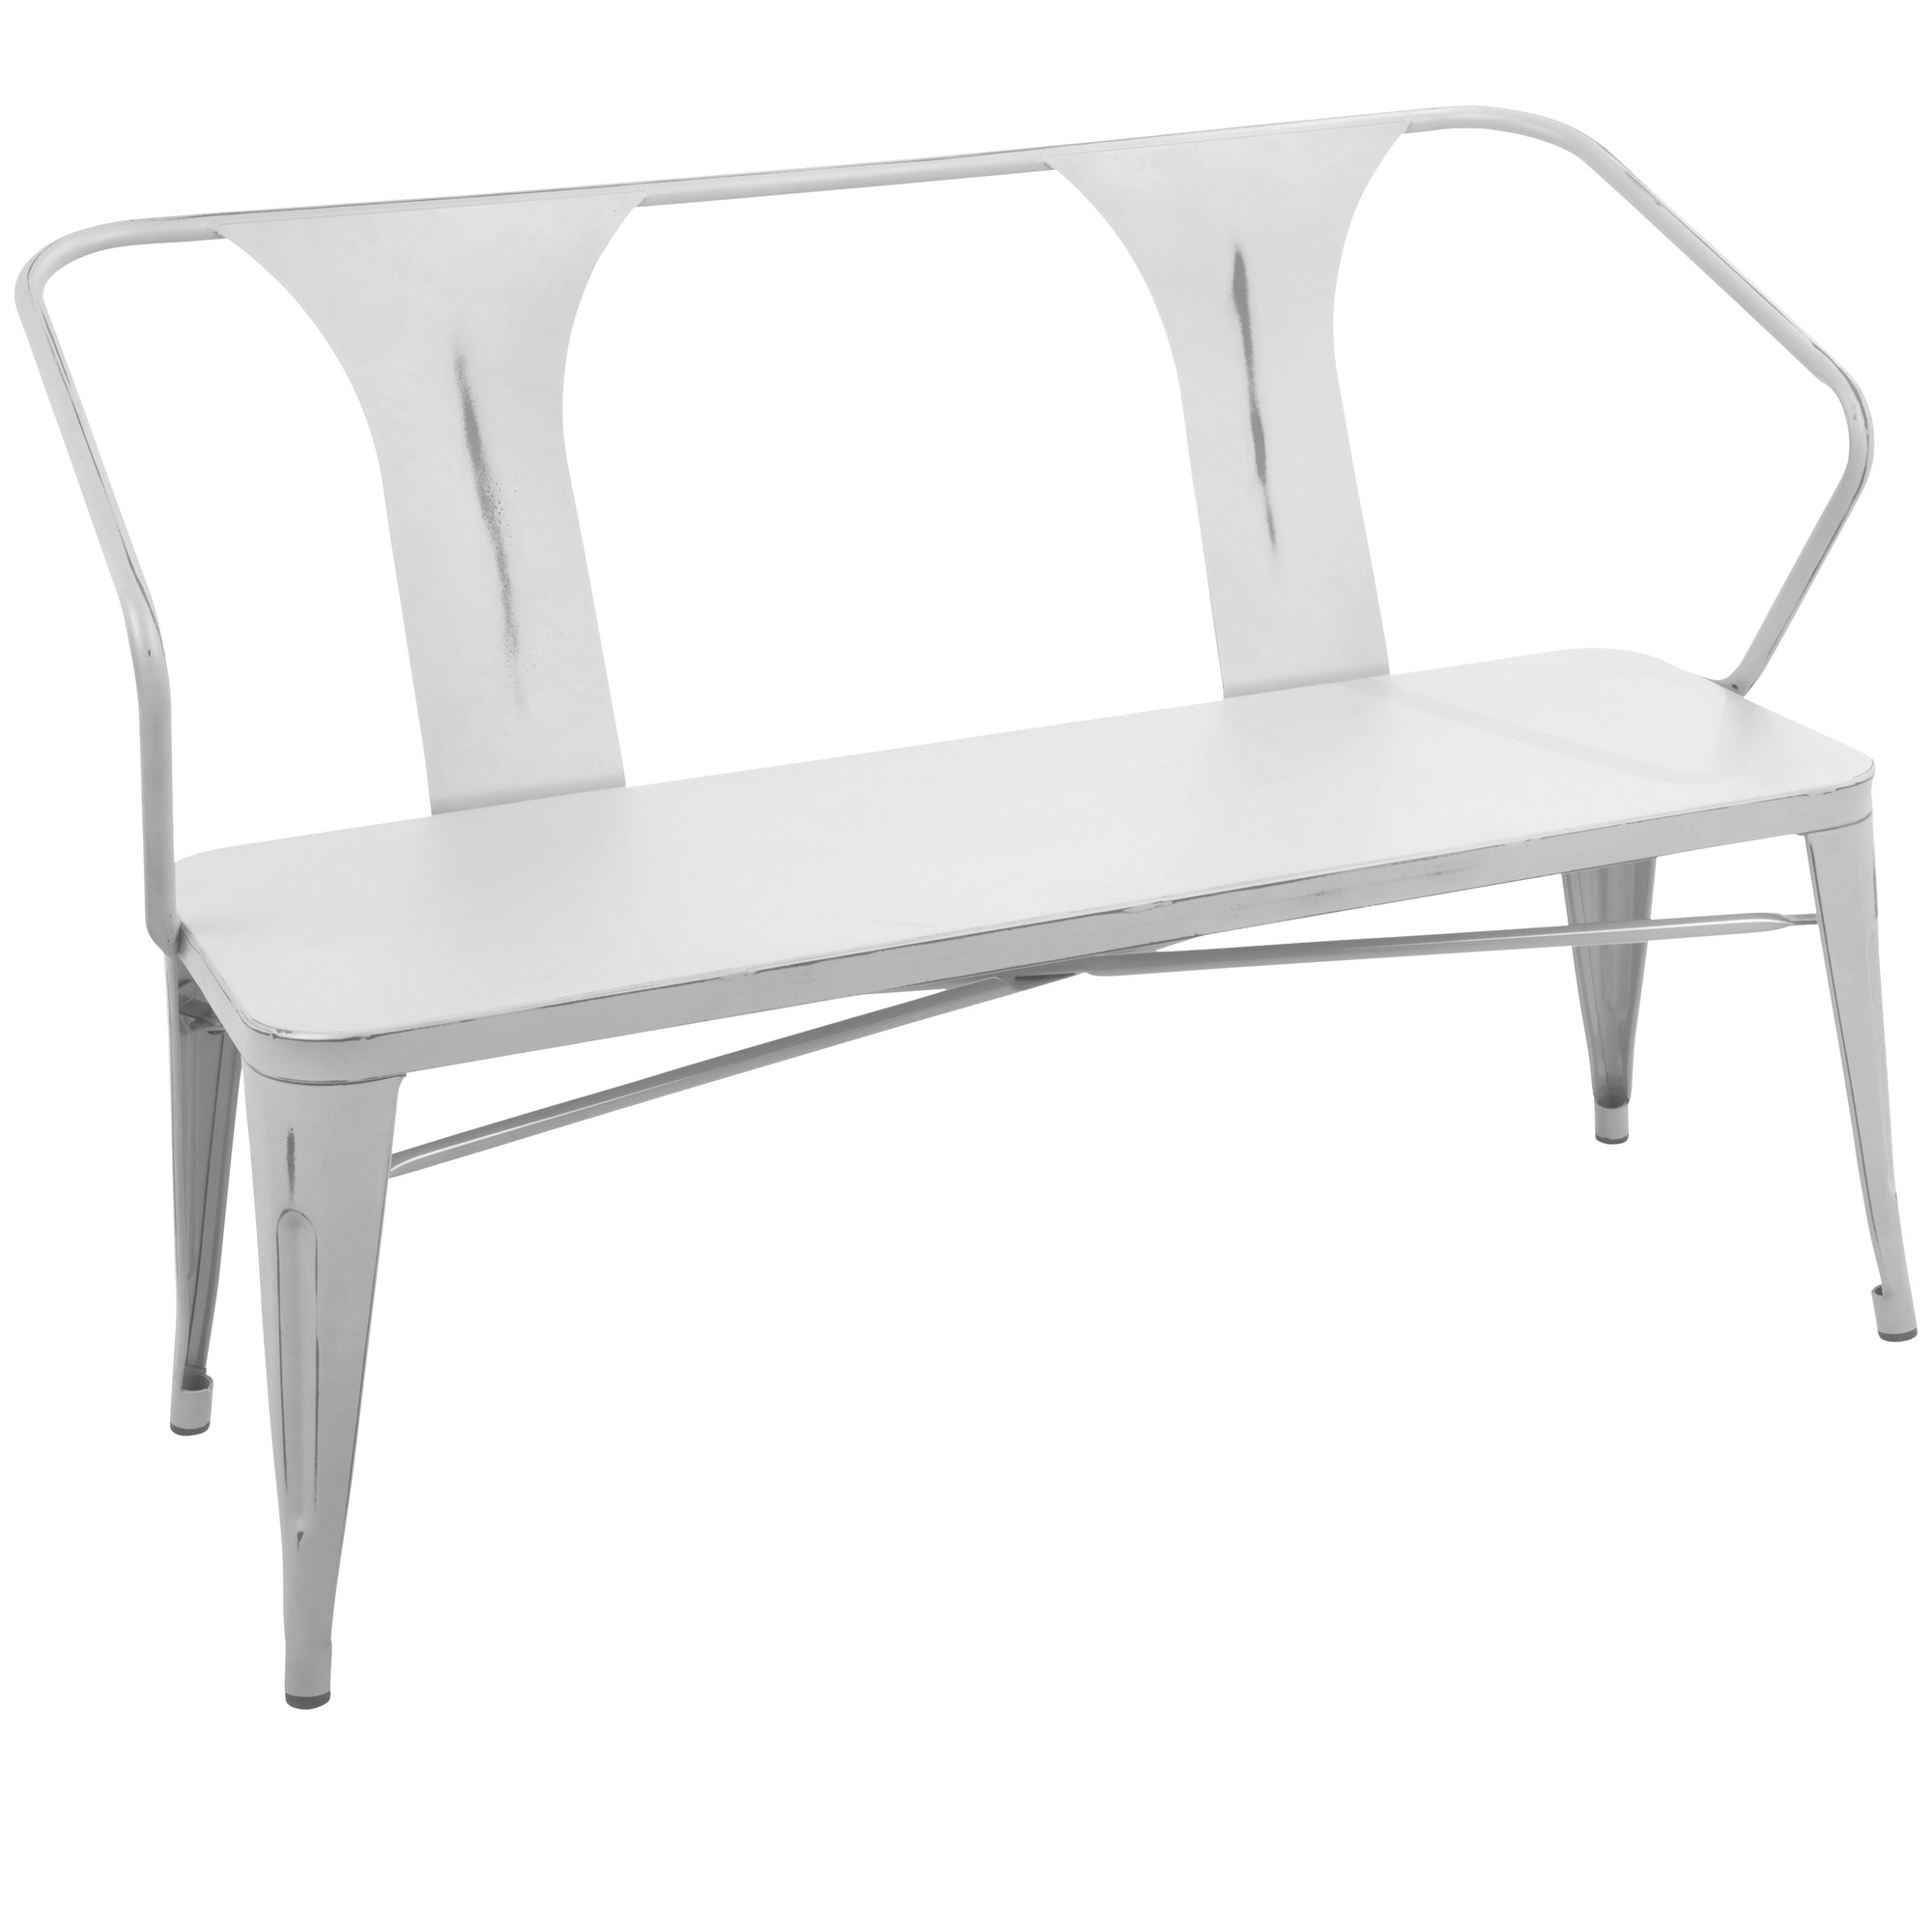 Waco Industrial Bench in Vintage White Metal by LumiSource - image 1 of 8